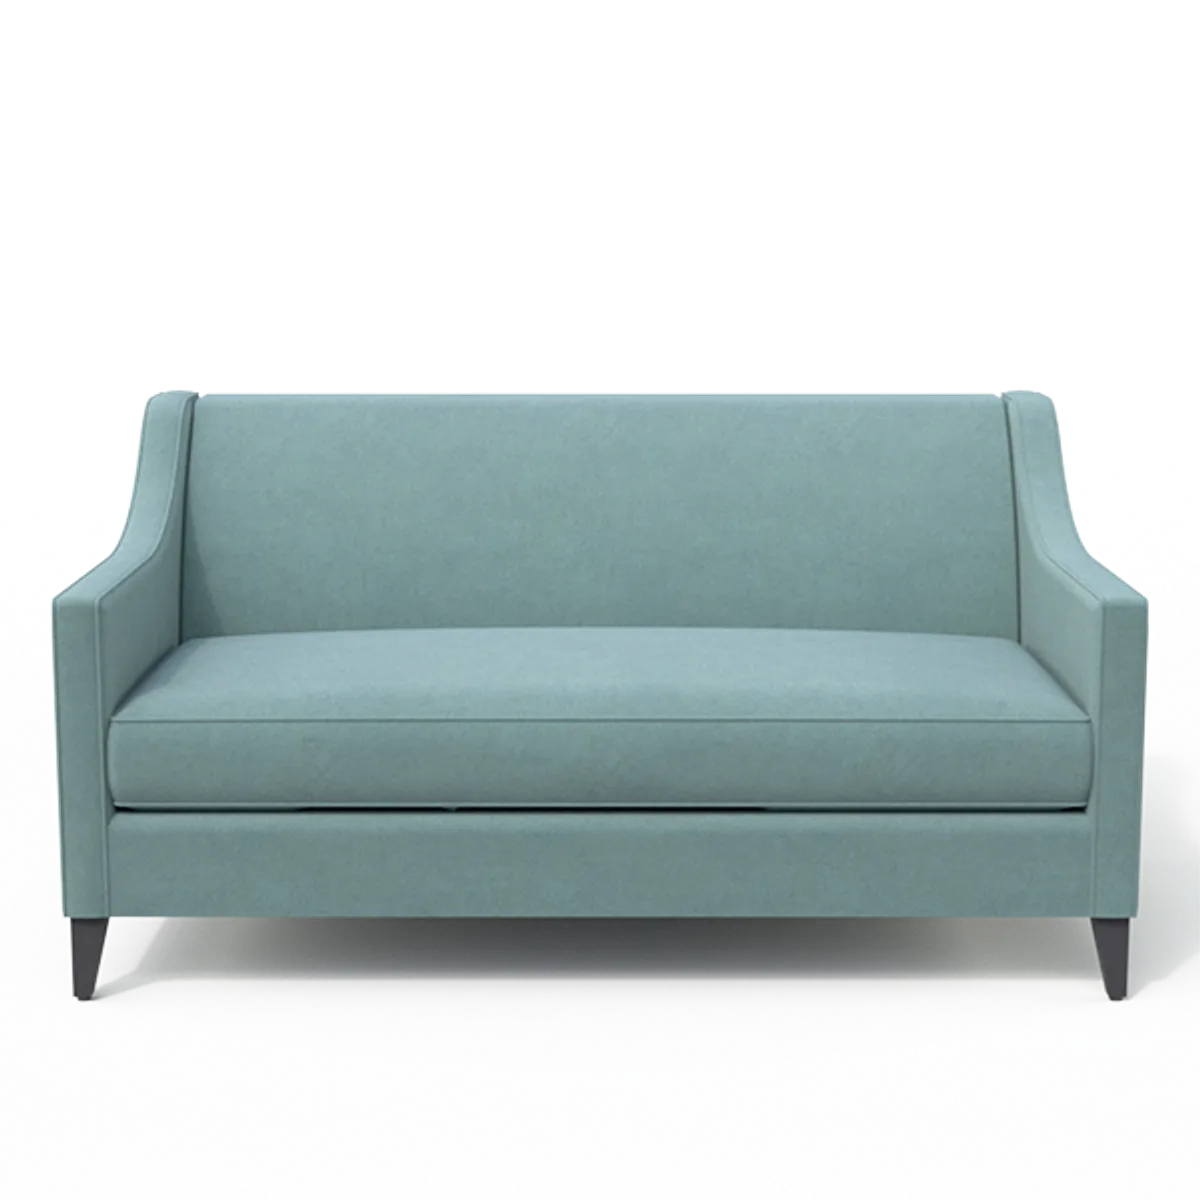 Lobby 3 Sofa 010 By Inside Out Contracts